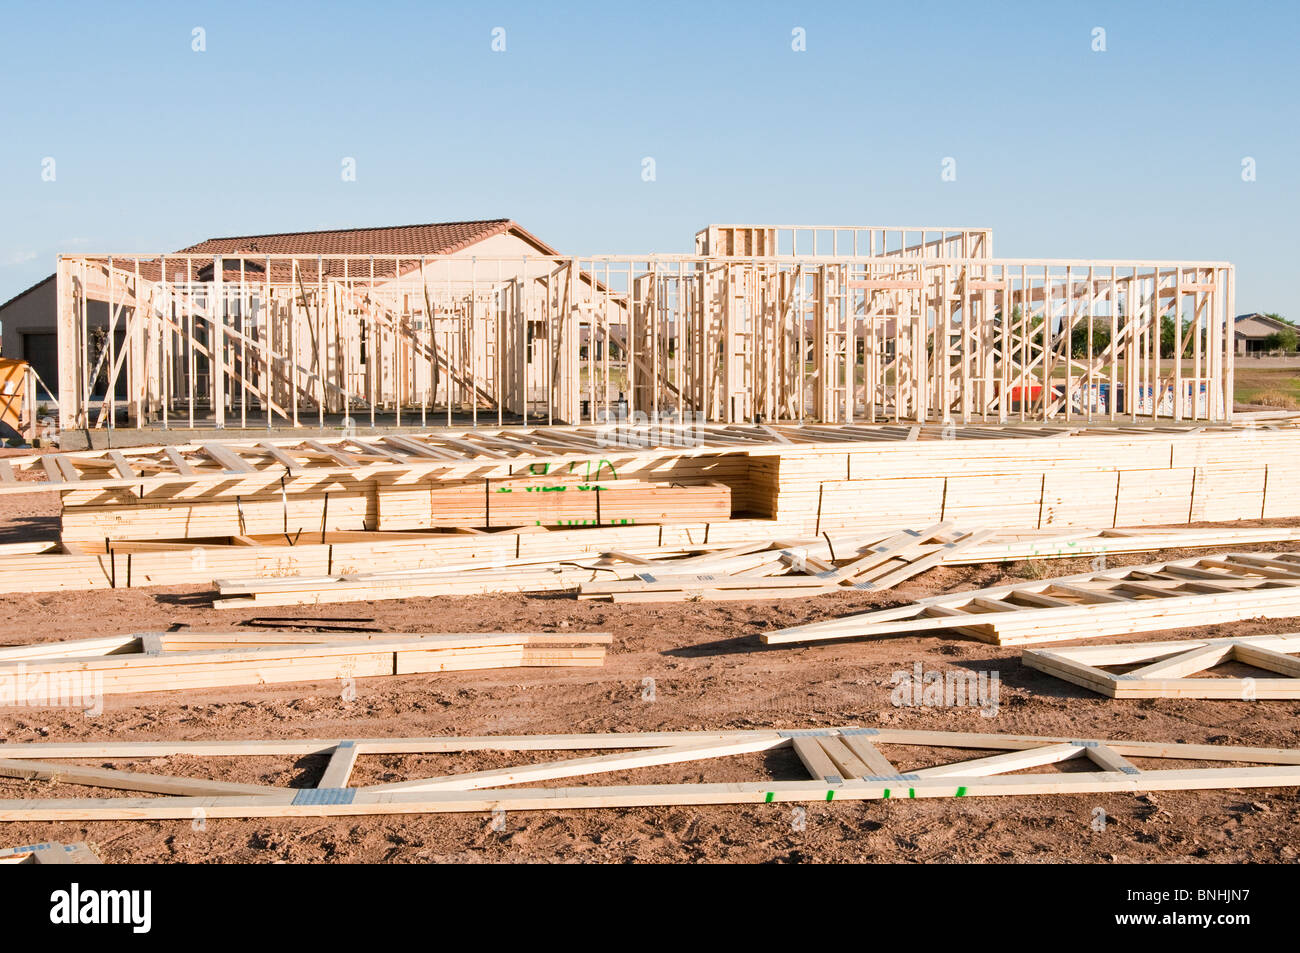 Building materials are stacked on the construction site for a new wood frame house being built in Arizona. Stock Photo